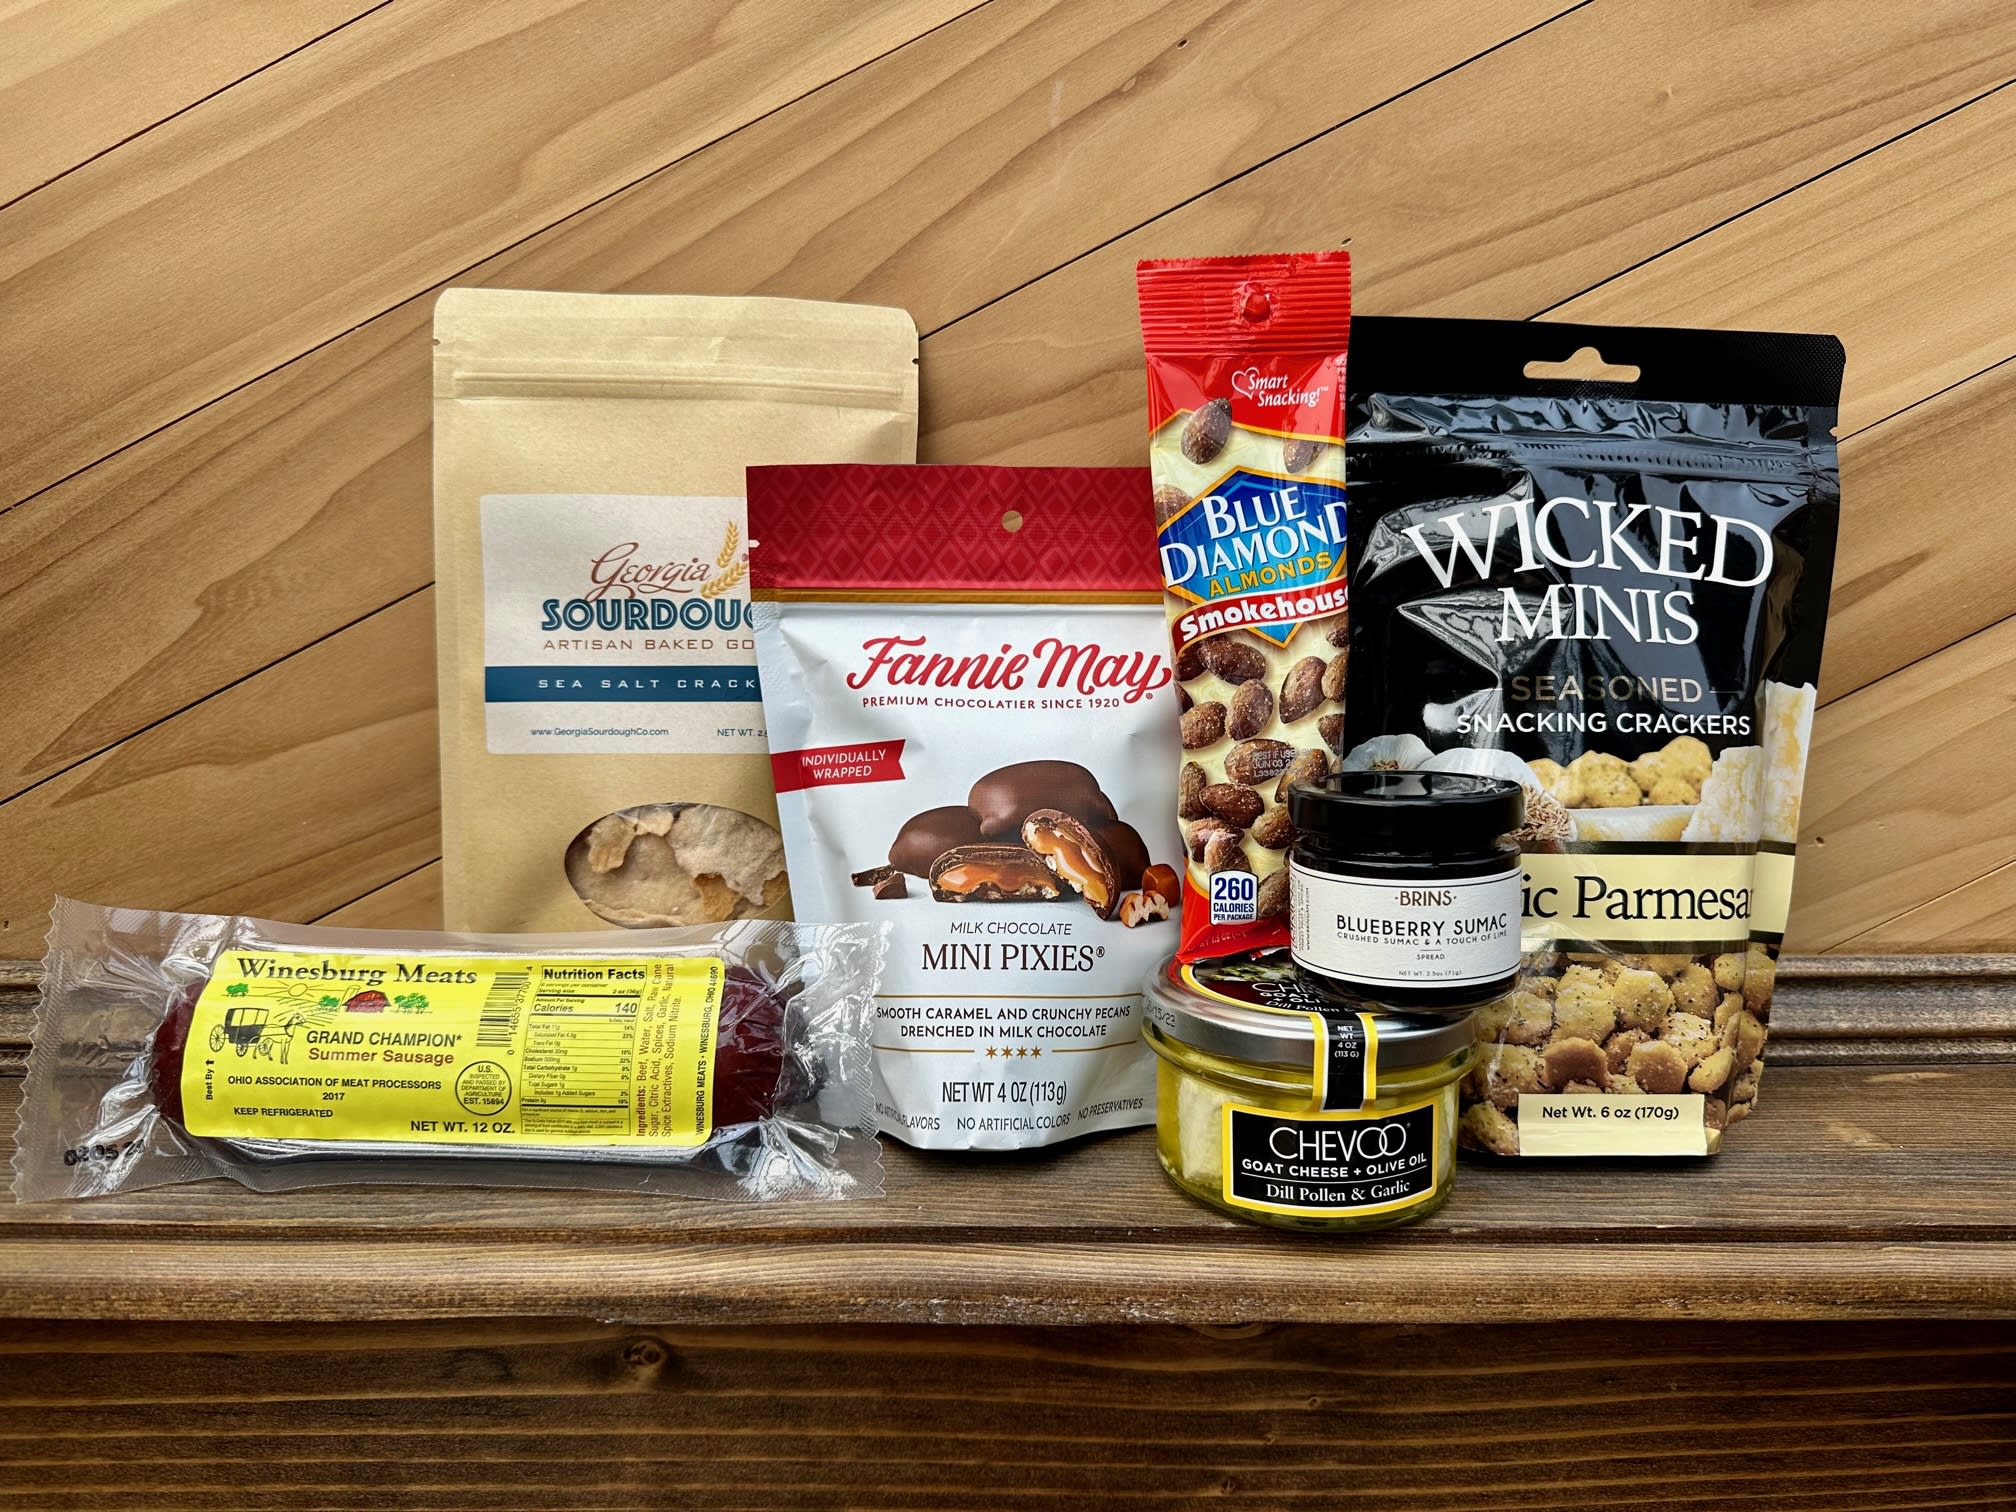 Gourmet Basket- Standard - Our baskets are filled with a variety of unique items. We include an array of snacks, such as Fannie May chocolates, jam, nuts, sausage, cheese, crackers, candy and more. Give us a call with any questions or specifications.  